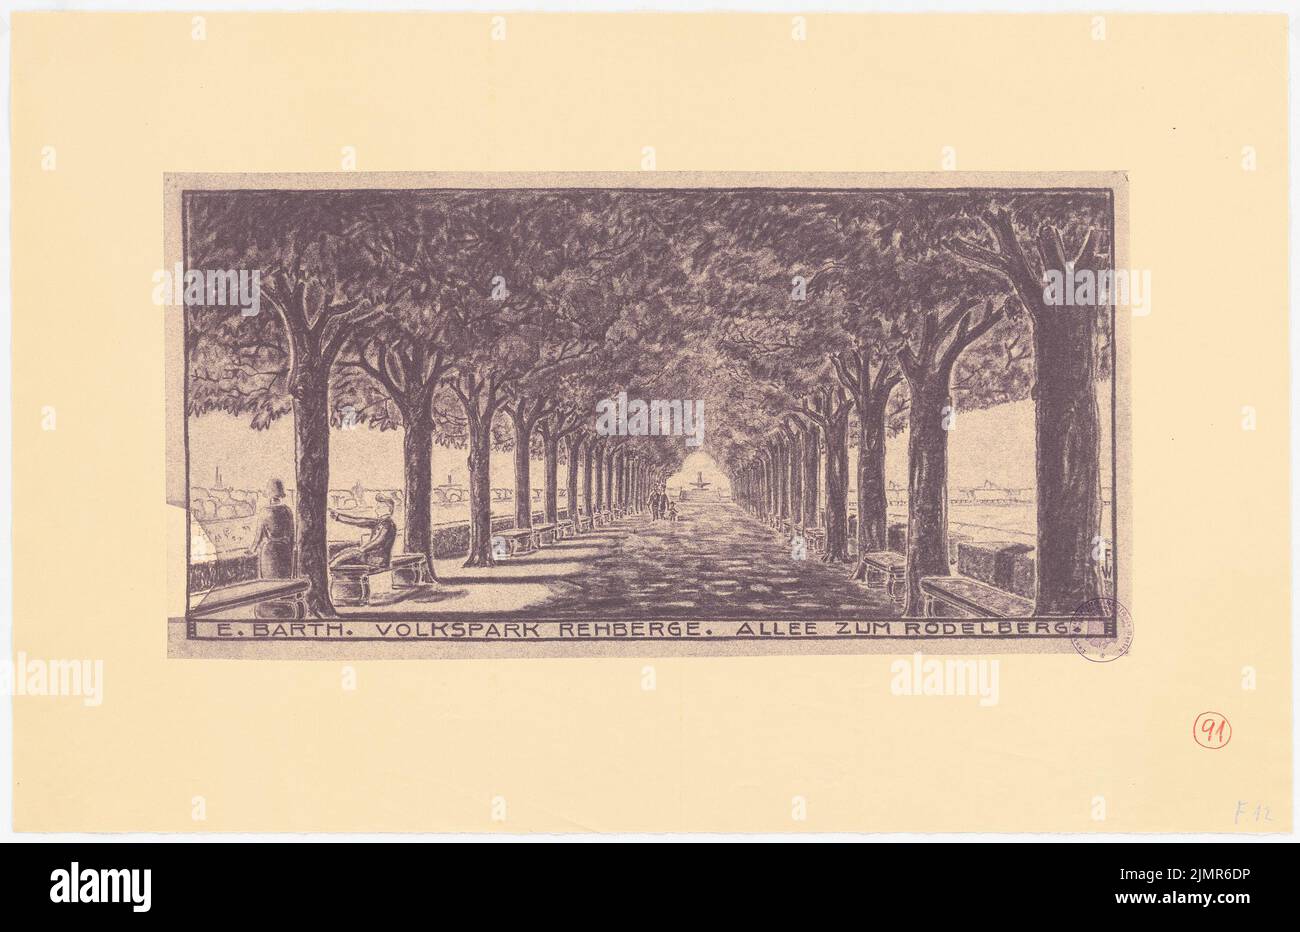 Barth Erwin (1880-1933), Volkspark Rehberge in Berlin-Wedding (1927-1927): Perspective view in the avenue to Rodelberg (view through the Rathenauhain on the Brunnen), stamp. Light break on paper, 46.5 x 71.8 cm (including scan edges) Barth Erwin  (1880-1933): Volkspark Rehberge, Berlin-Wedding Stock Photo